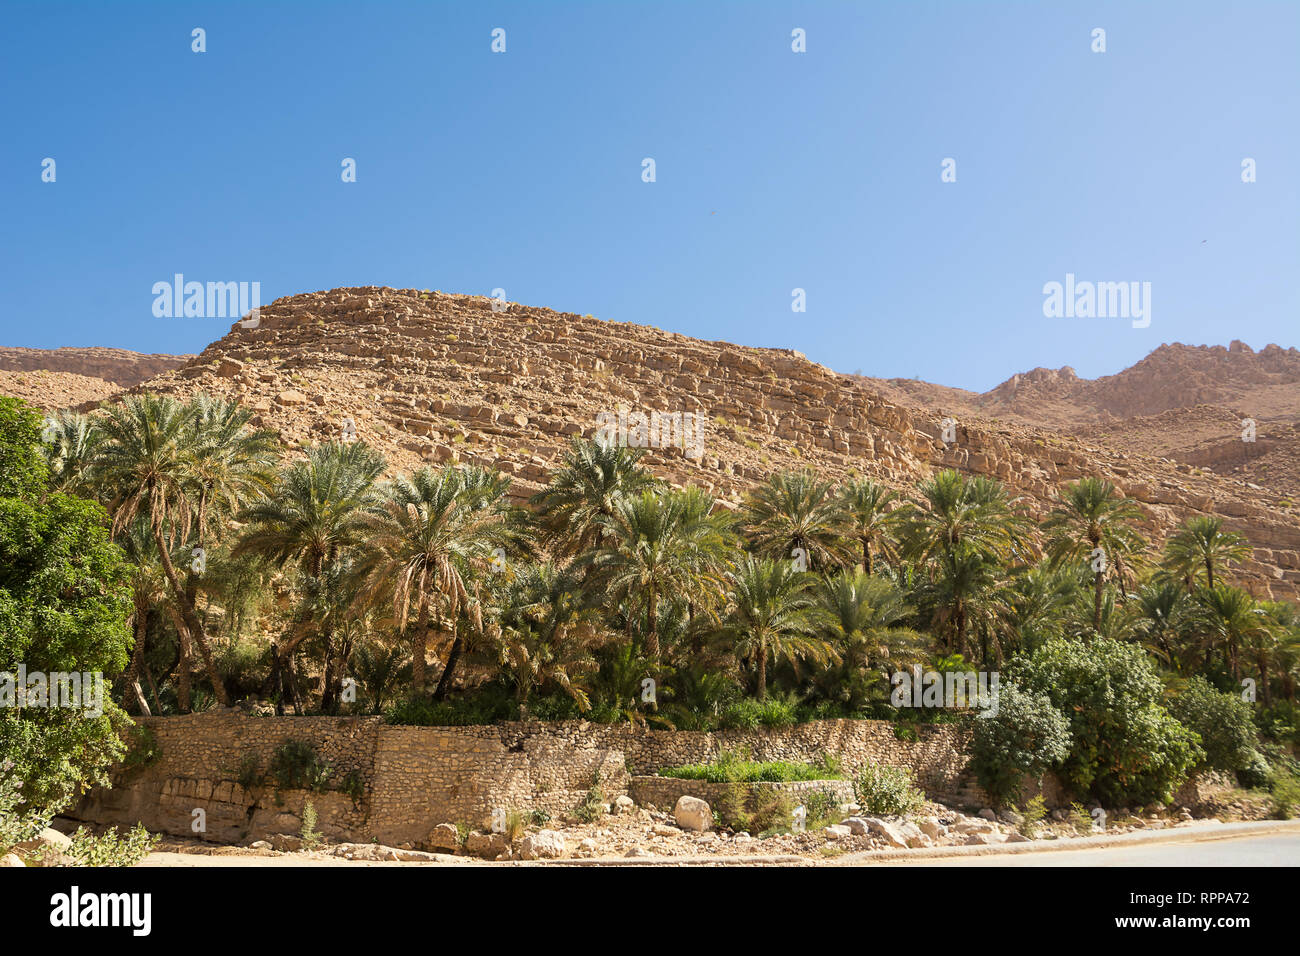 Oasis with Palms in the middle of the rocky desert Stock Photo